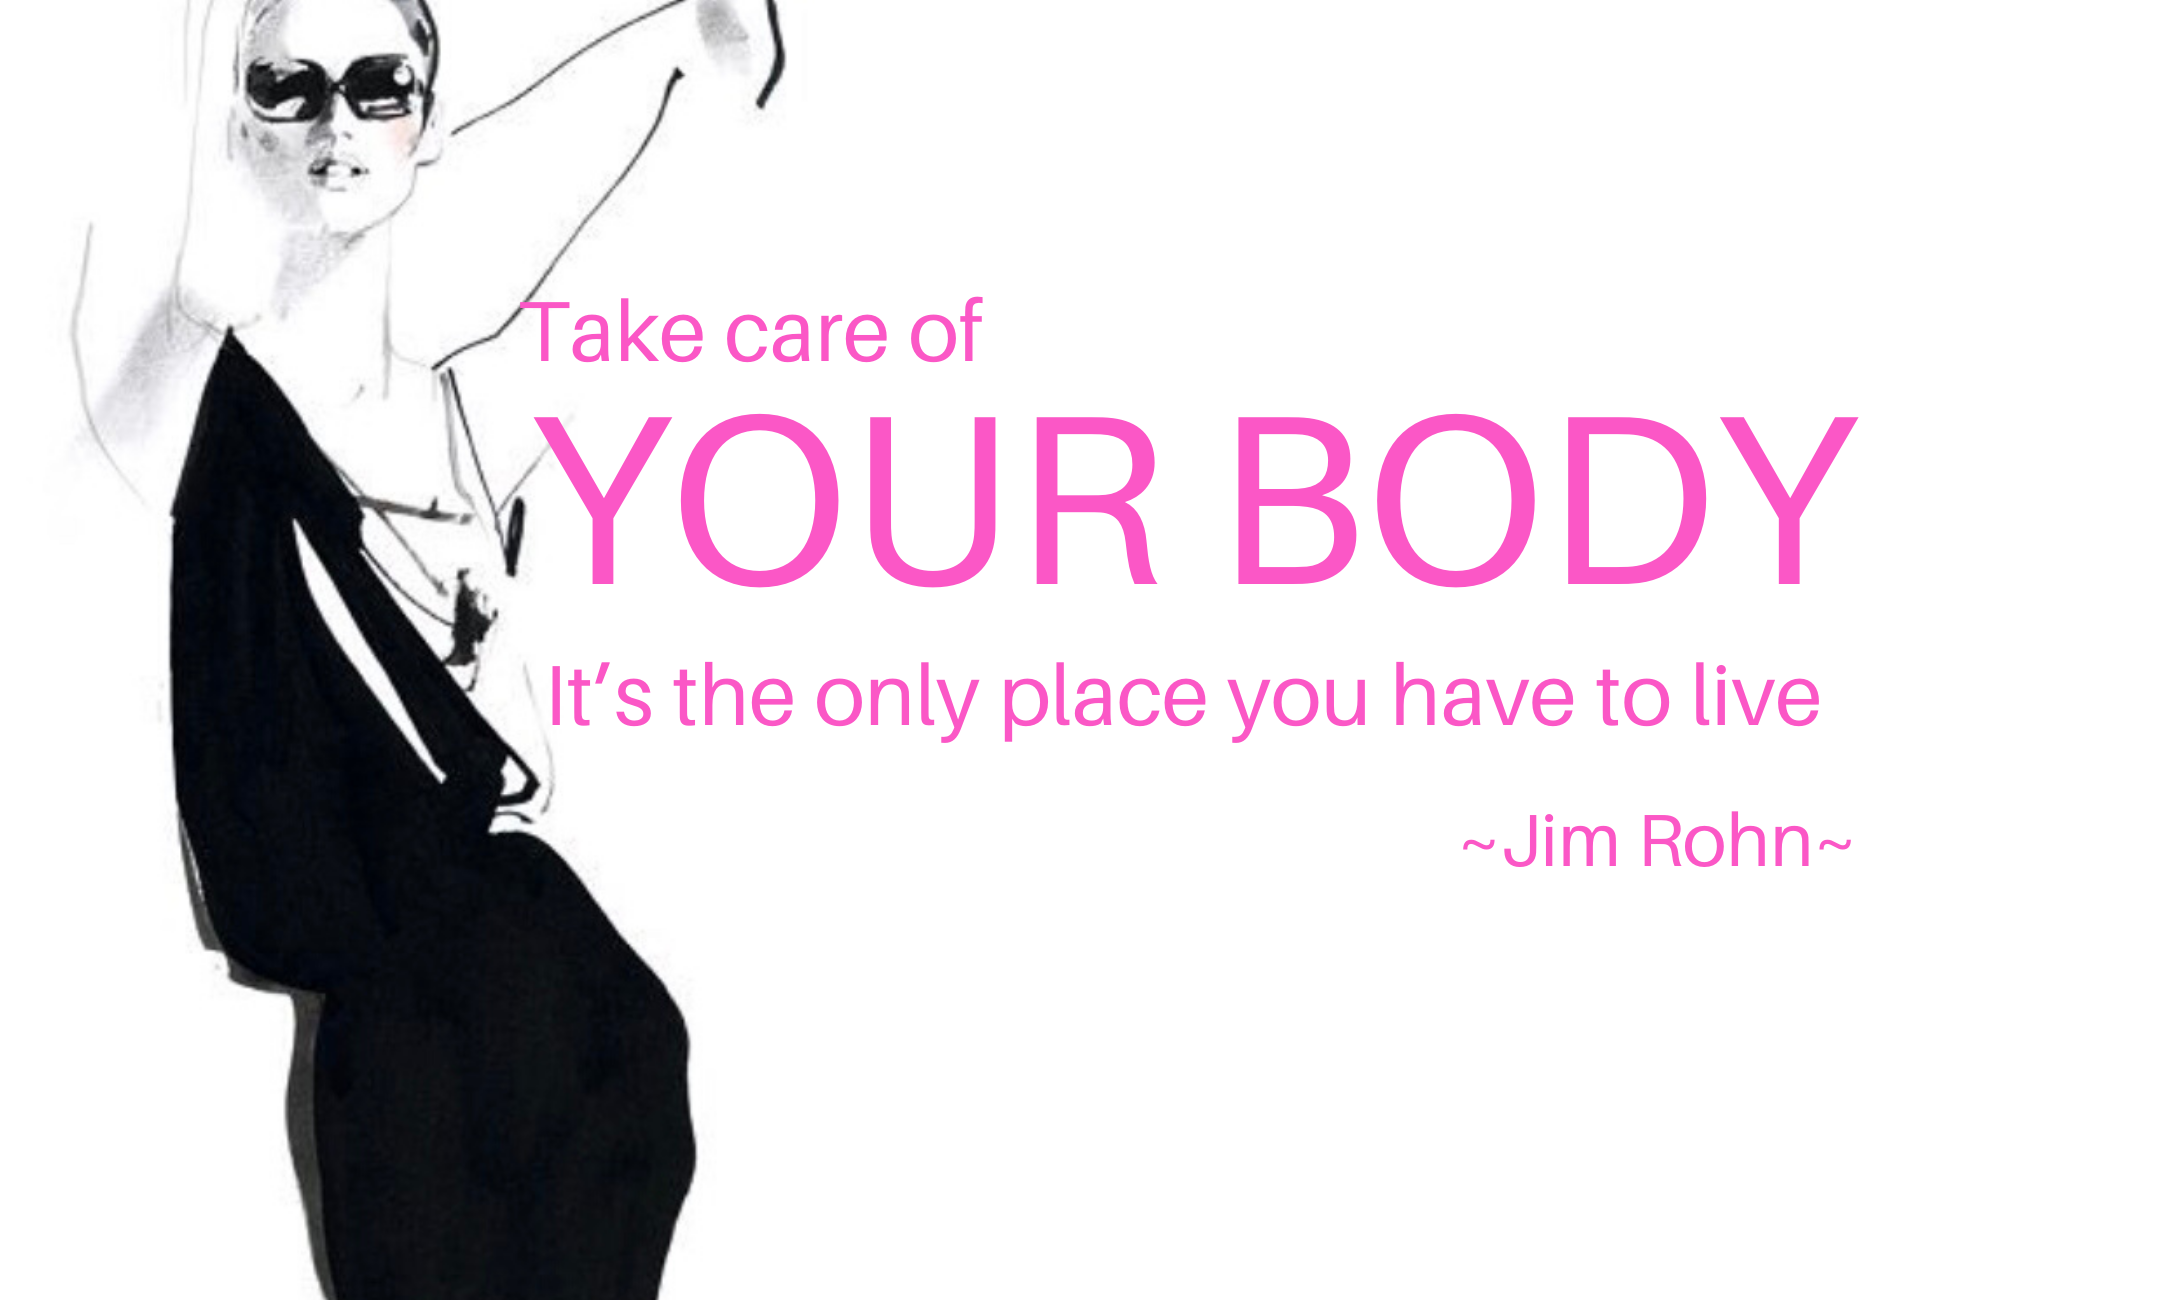 look-after-your-body-it-is-the-only-place-you-have-live-jim-rohn-look-good-tips-with-good-looks-bible-glb-by-jehan-mir